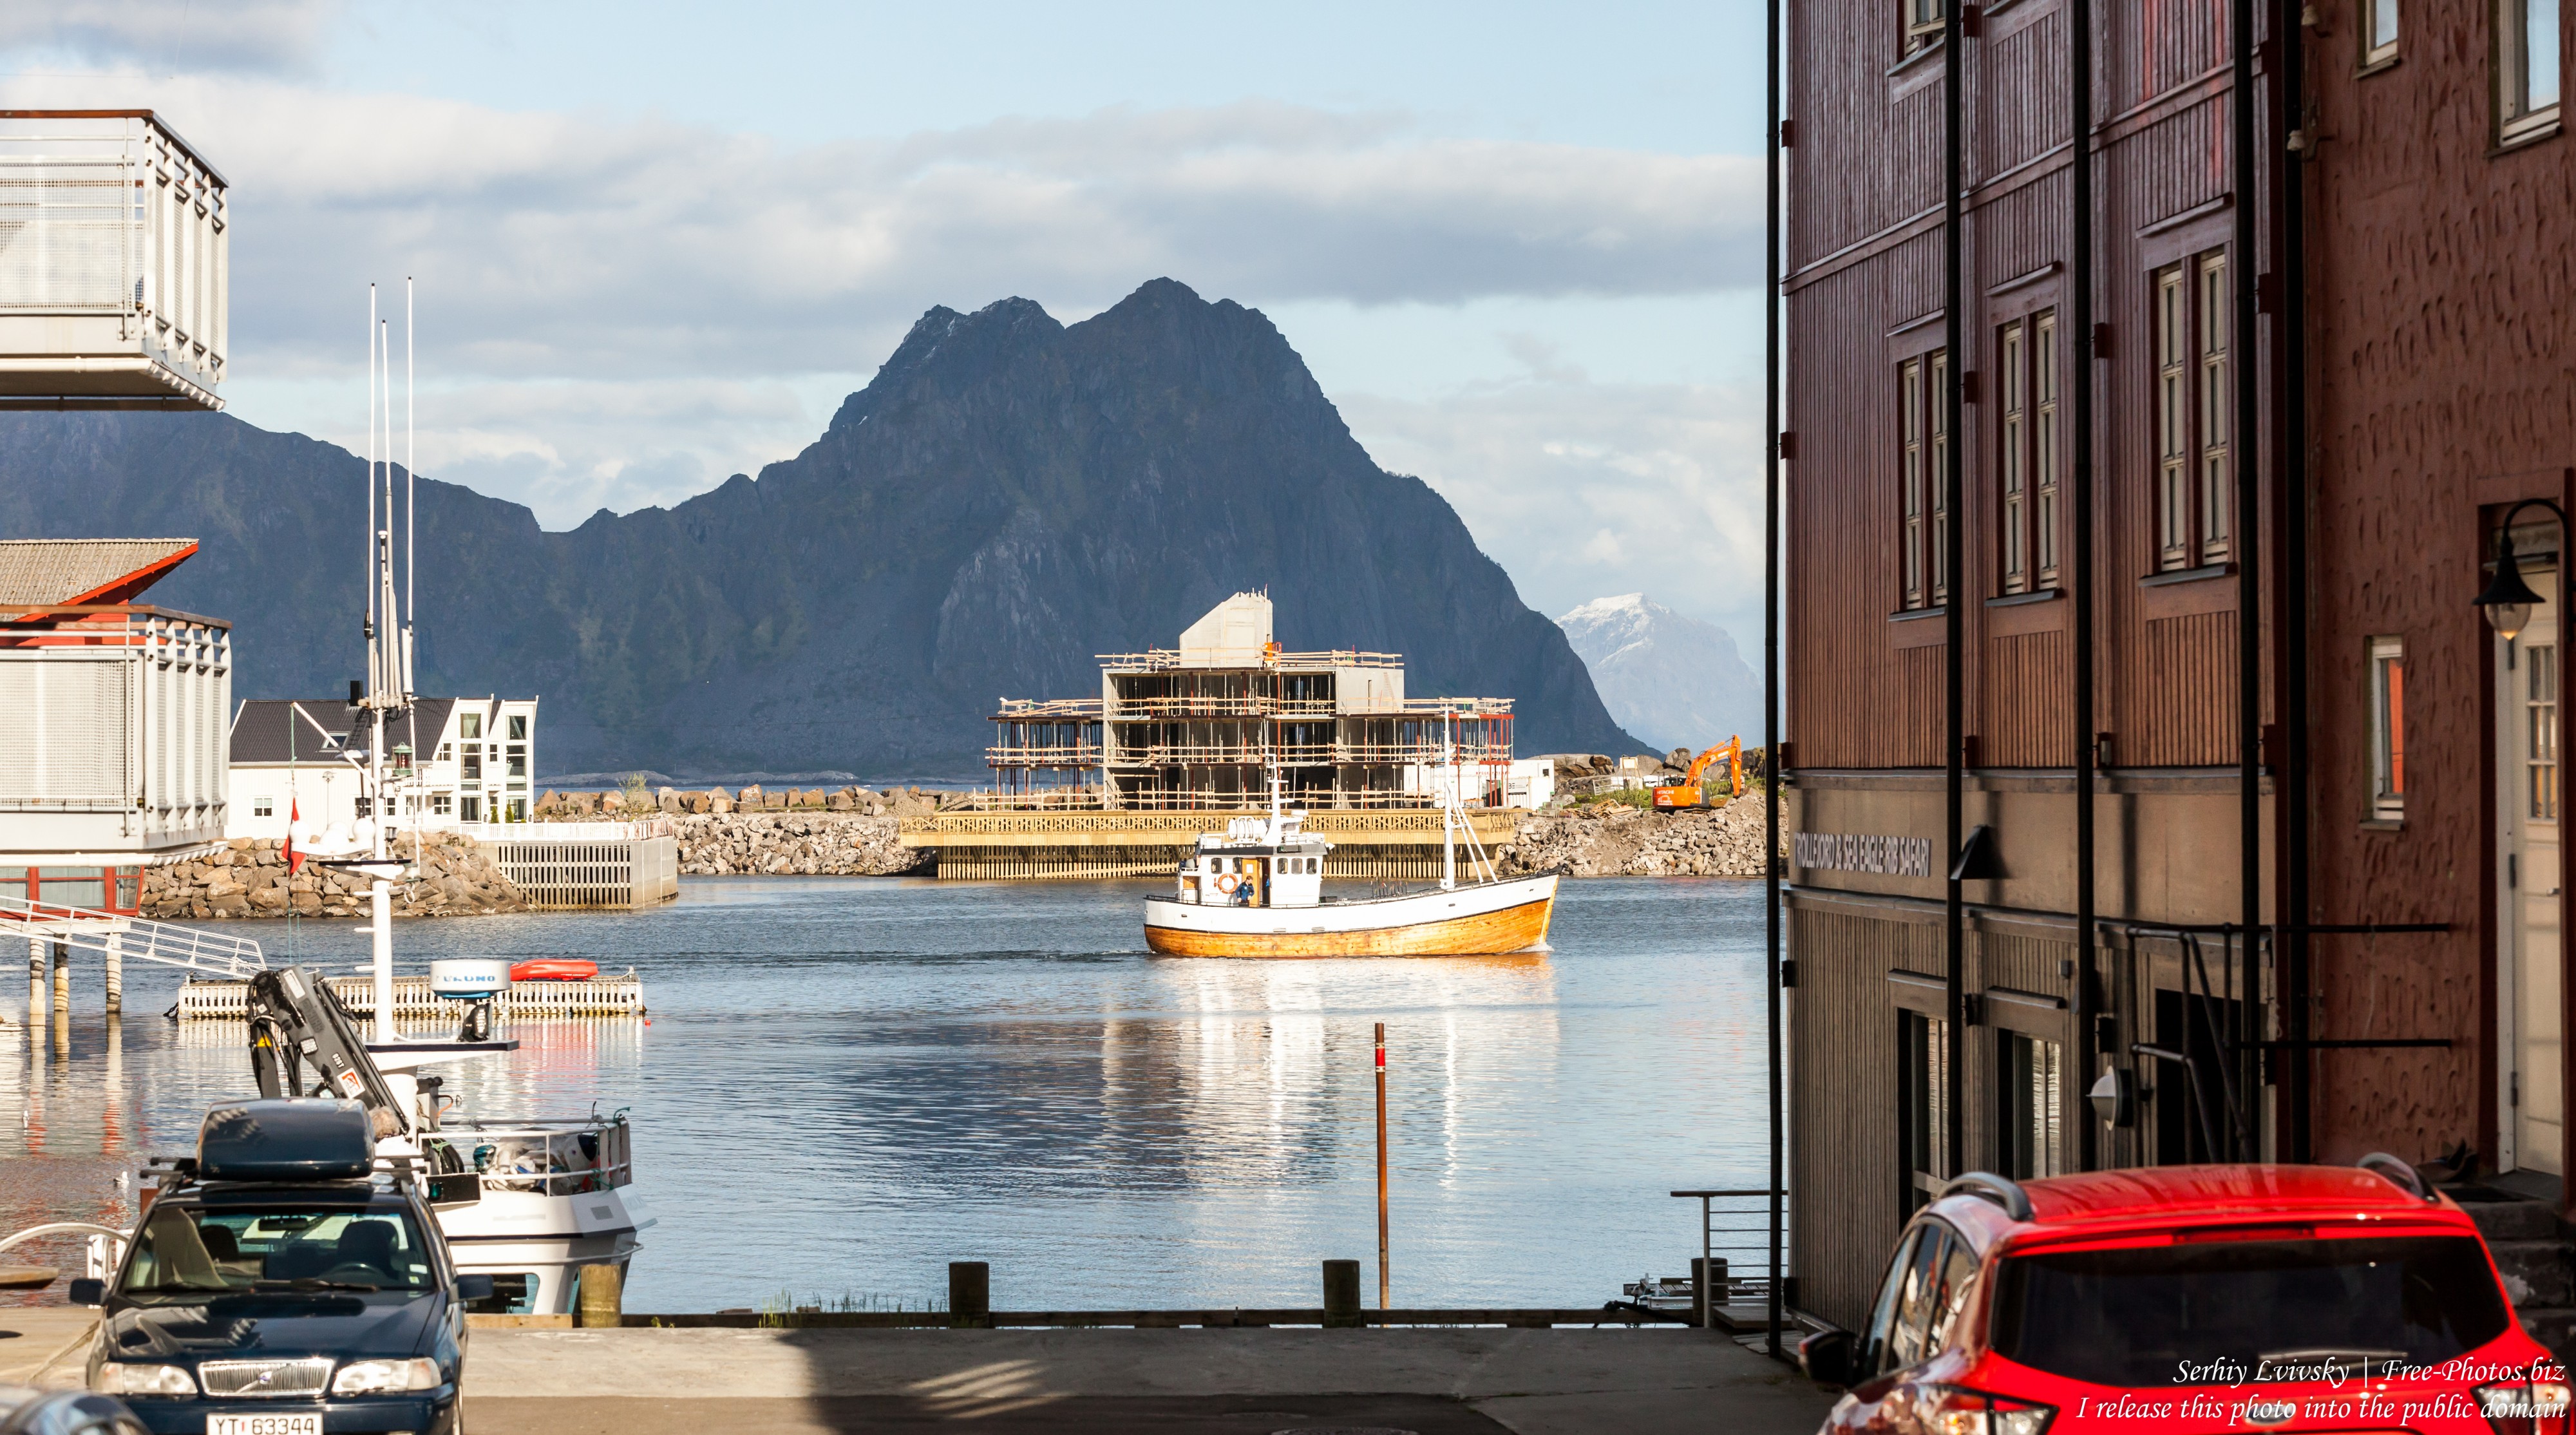 Svolvaer, Lofoten, Norway photographed in June 2018 by Serhiy Lvivsky, picture 33